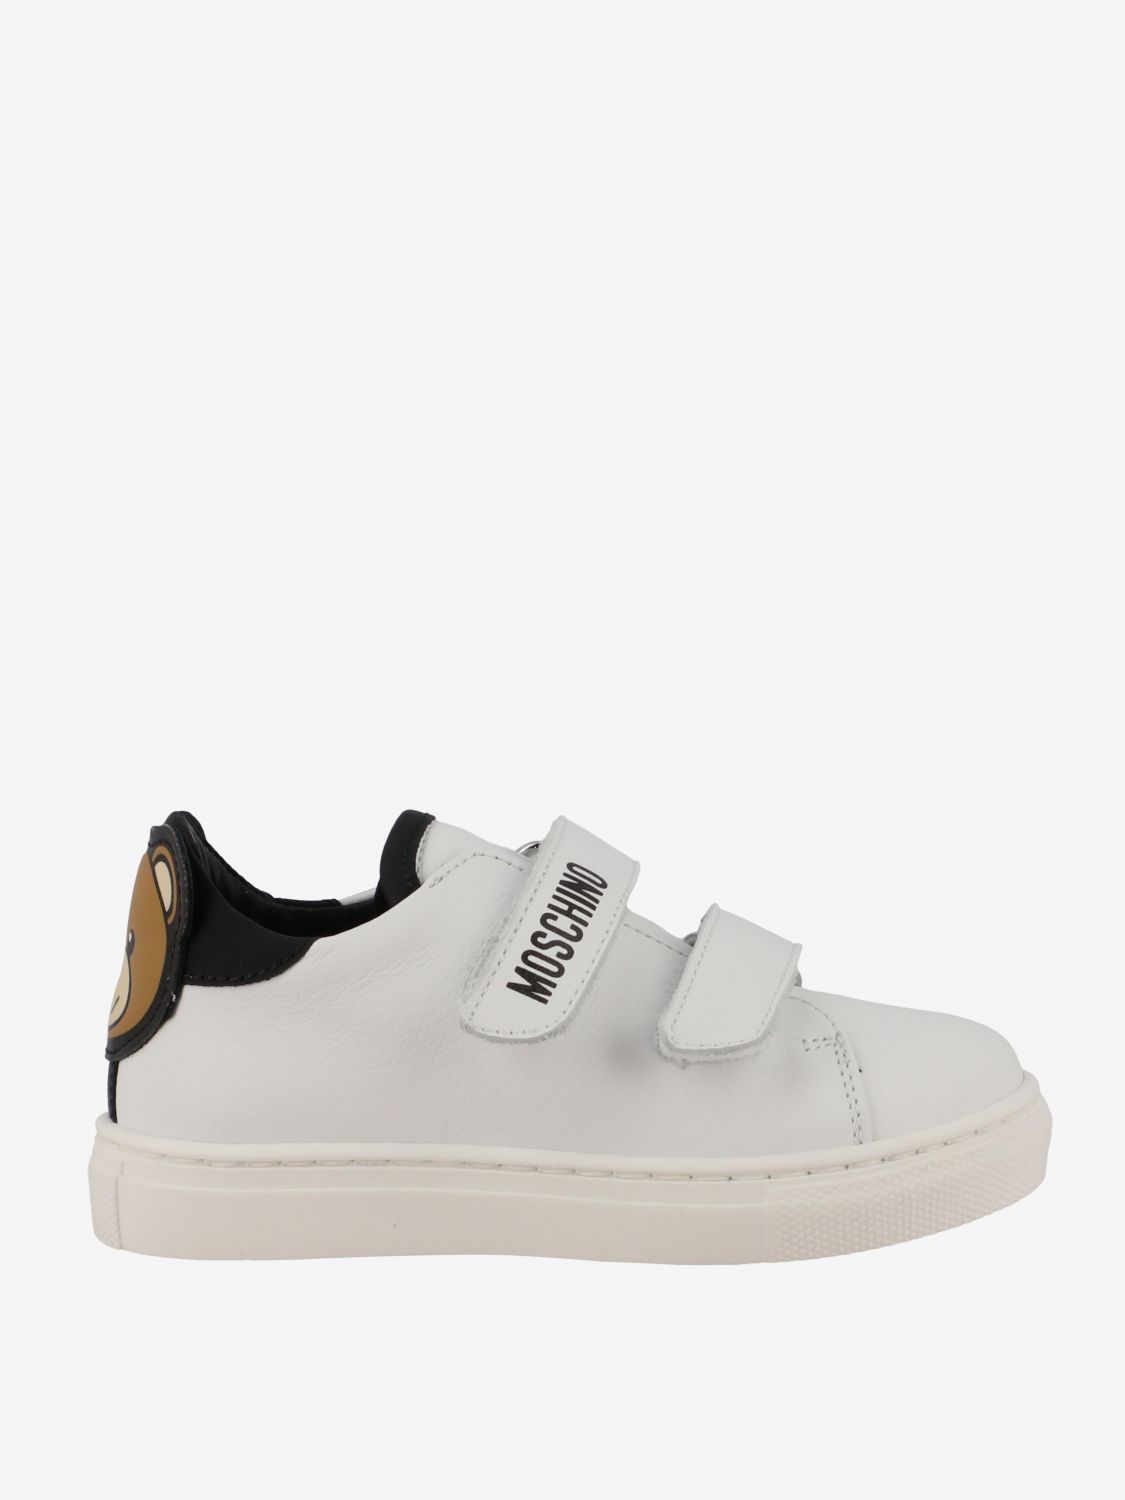 moschino infant shoes